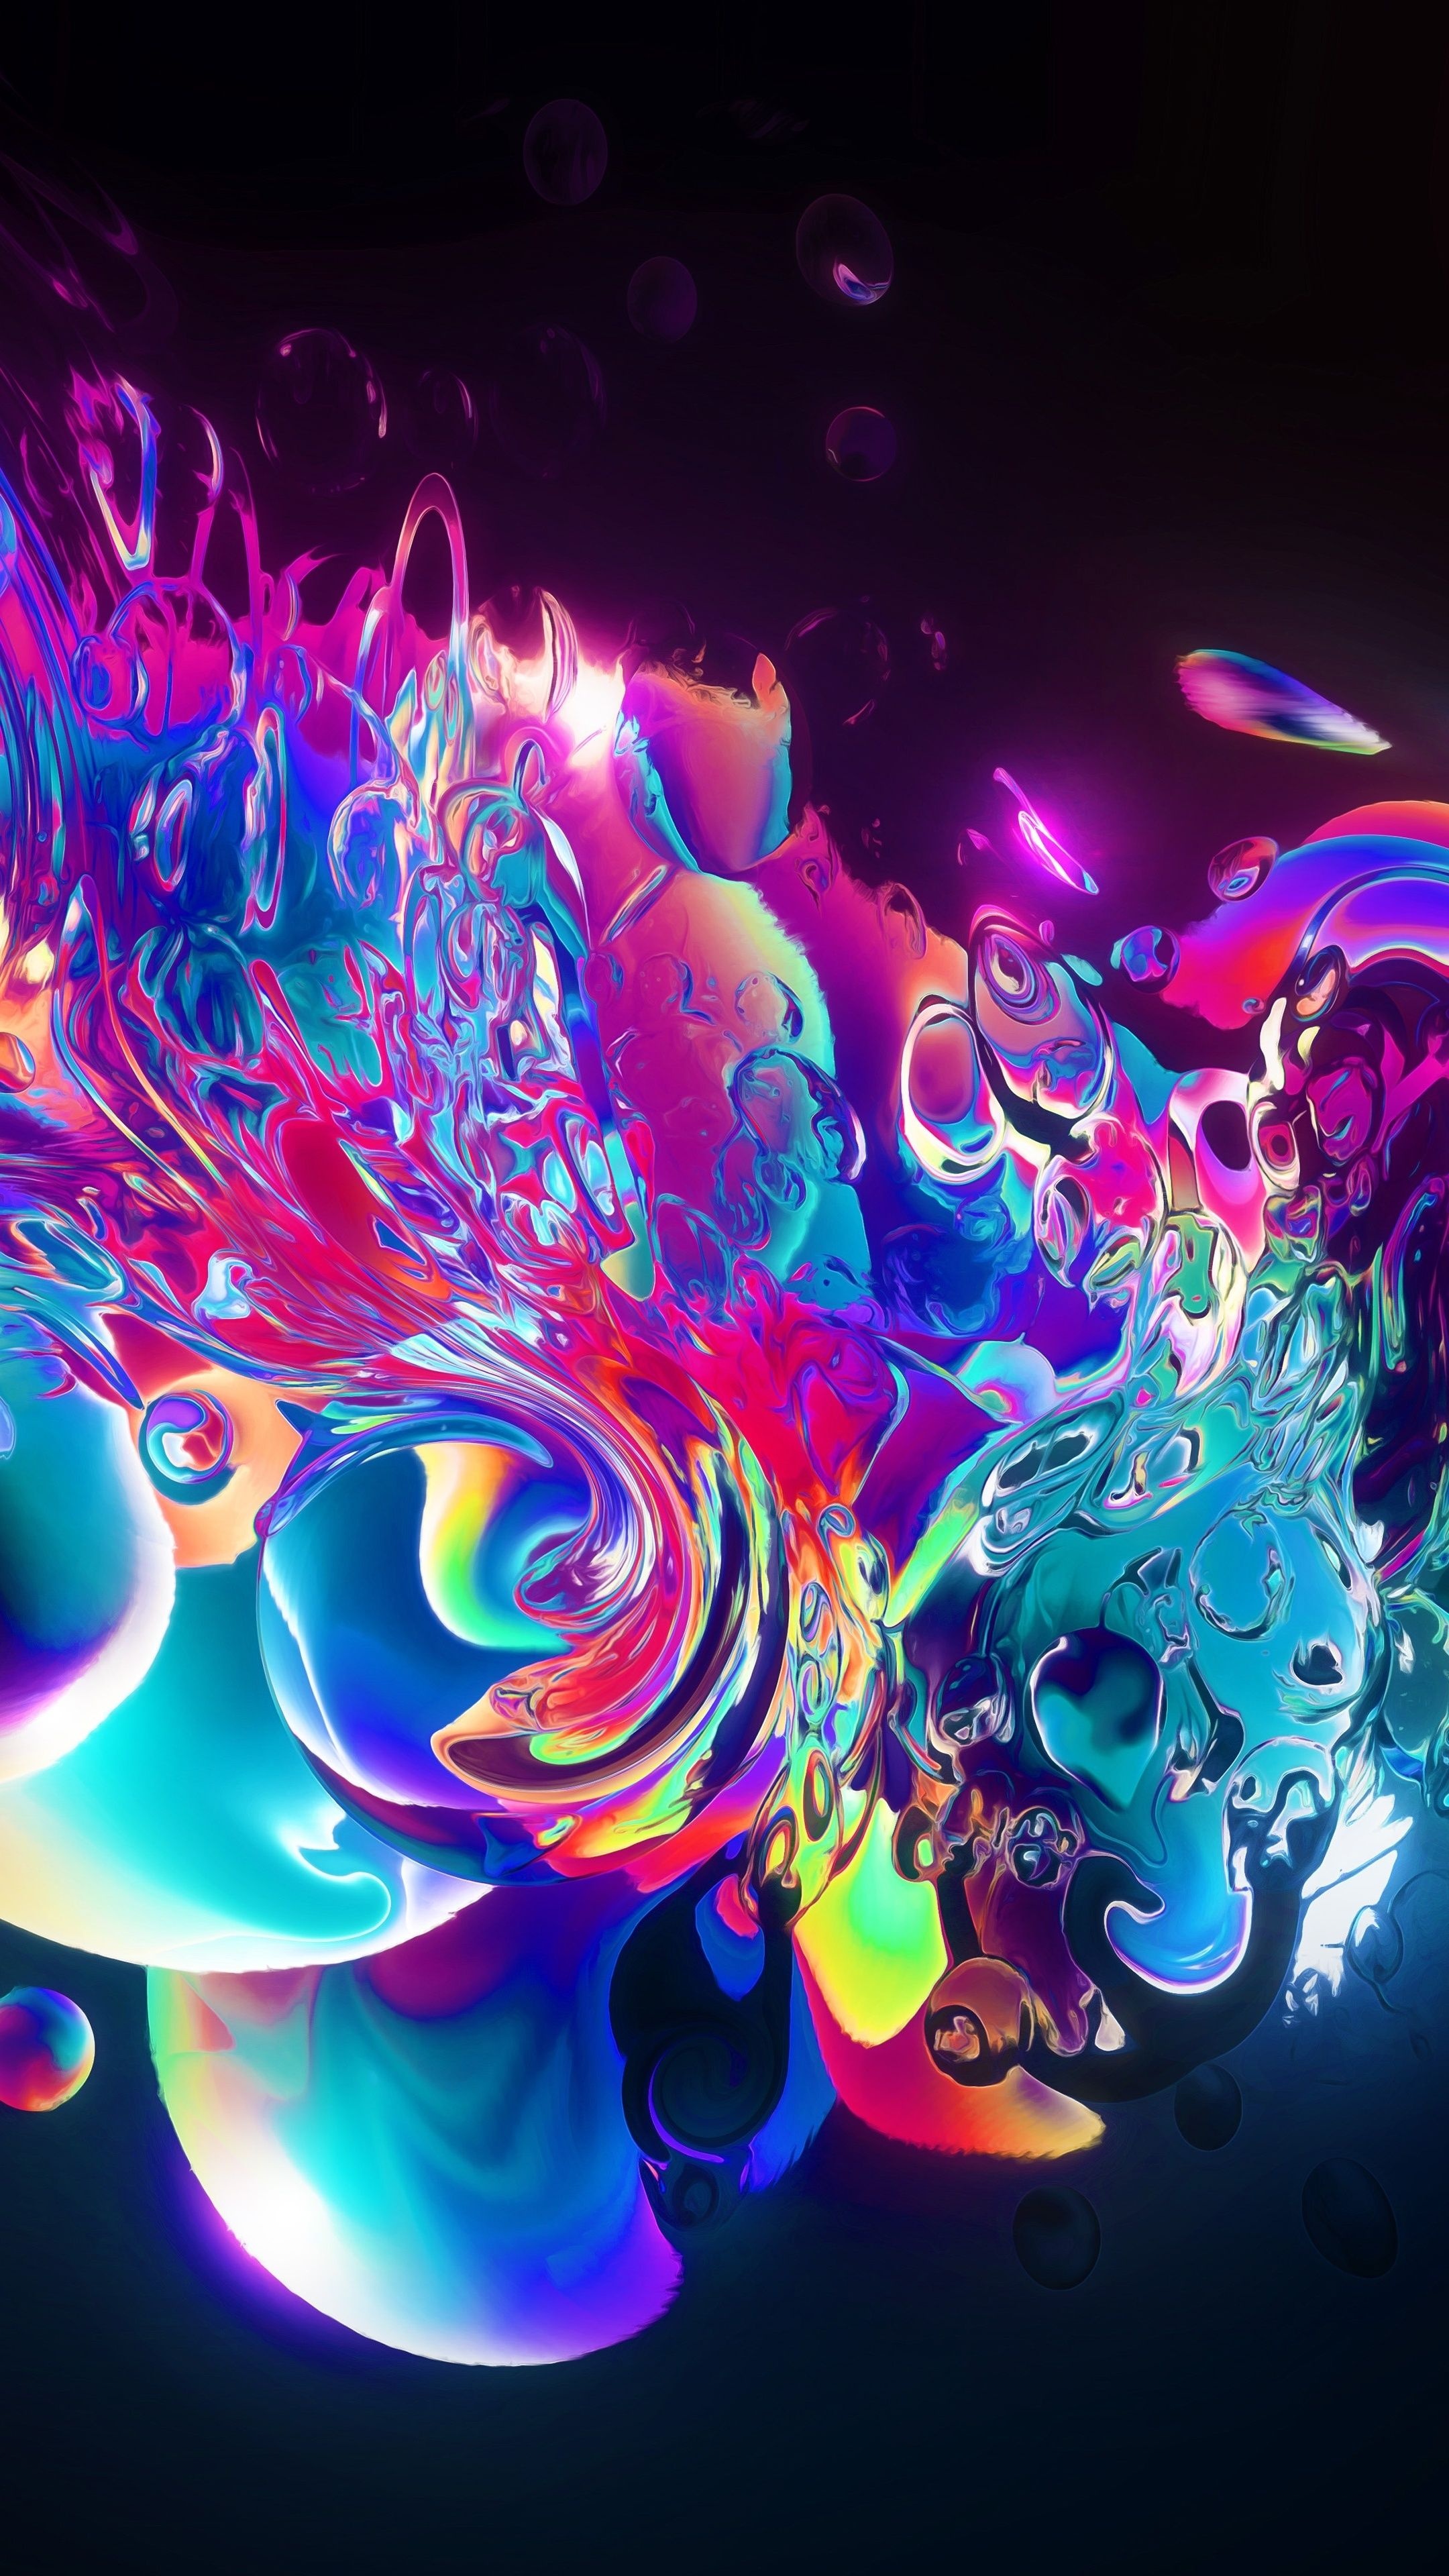 Graphic: Abstract colorful liquid blast art, Multicolored chaotic forms. 2160x3840 4K Wallpaper.